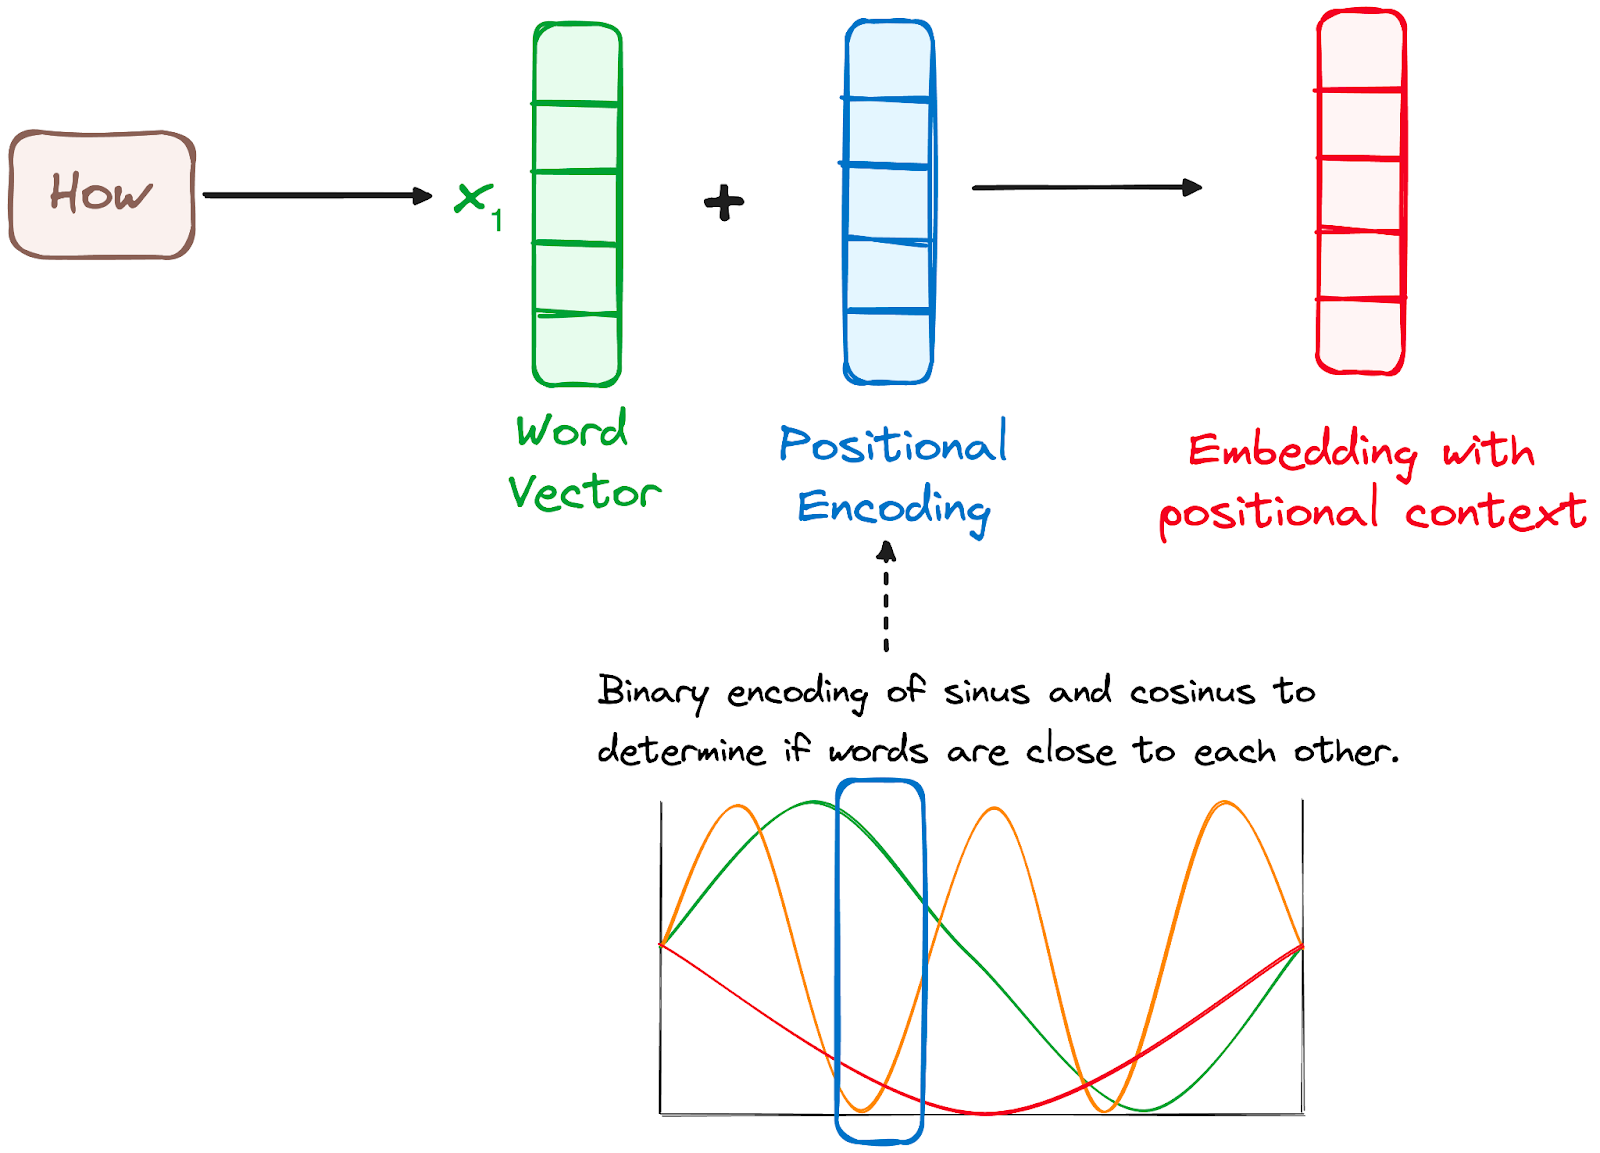 Encoder’s workflow. Positional encoding.